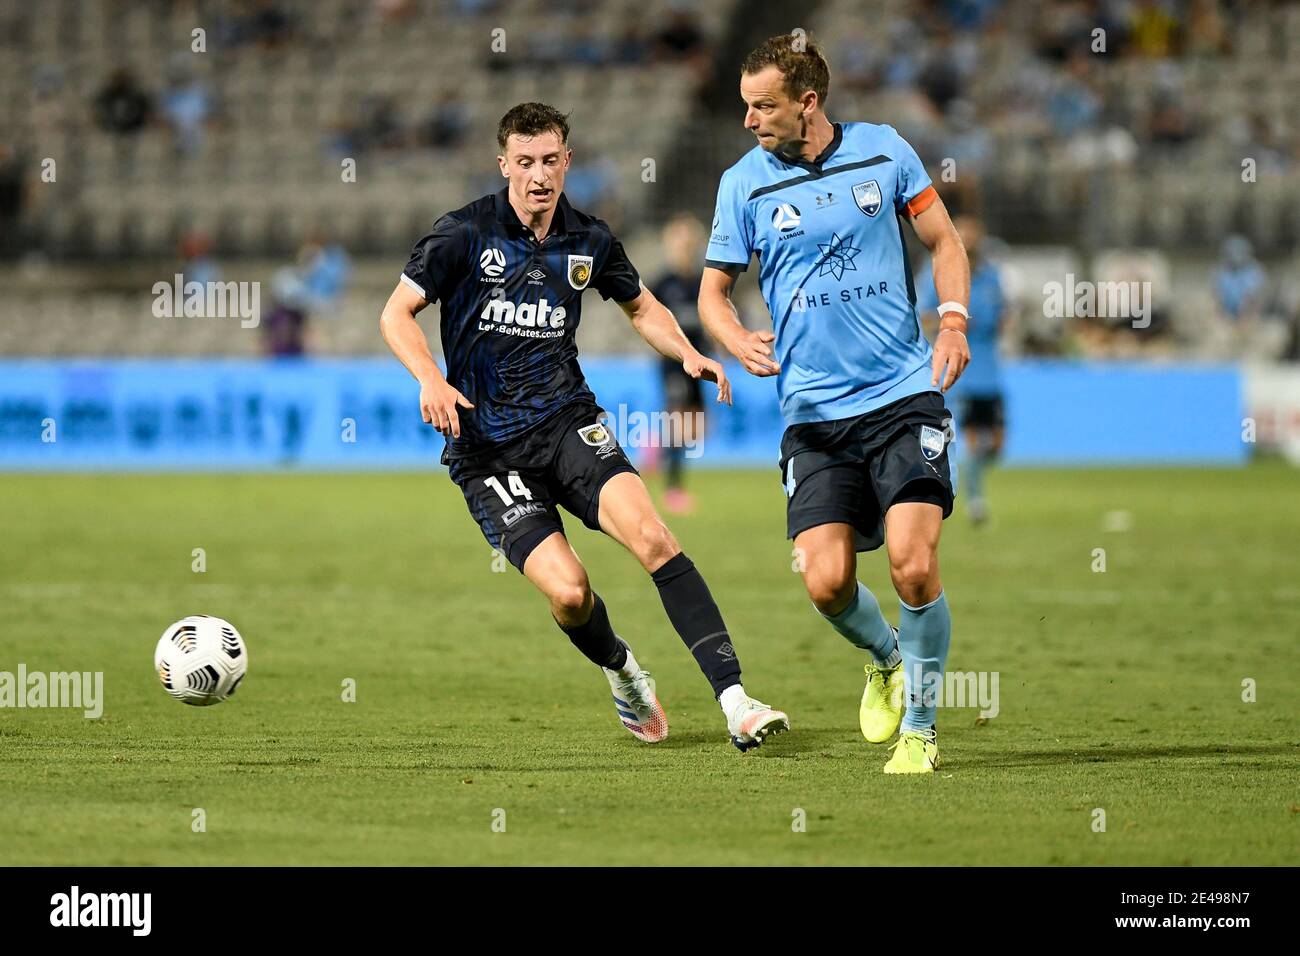 22nd January 2021; Jubilee Stadium, New South Wales, Australia; A League Football, Sydney Football Club versus Central Coast Mariners; Alex Wilkinson of Sydney clears the ball as Daniel Bouman of Central Coast Mariners approaches Stock Photo